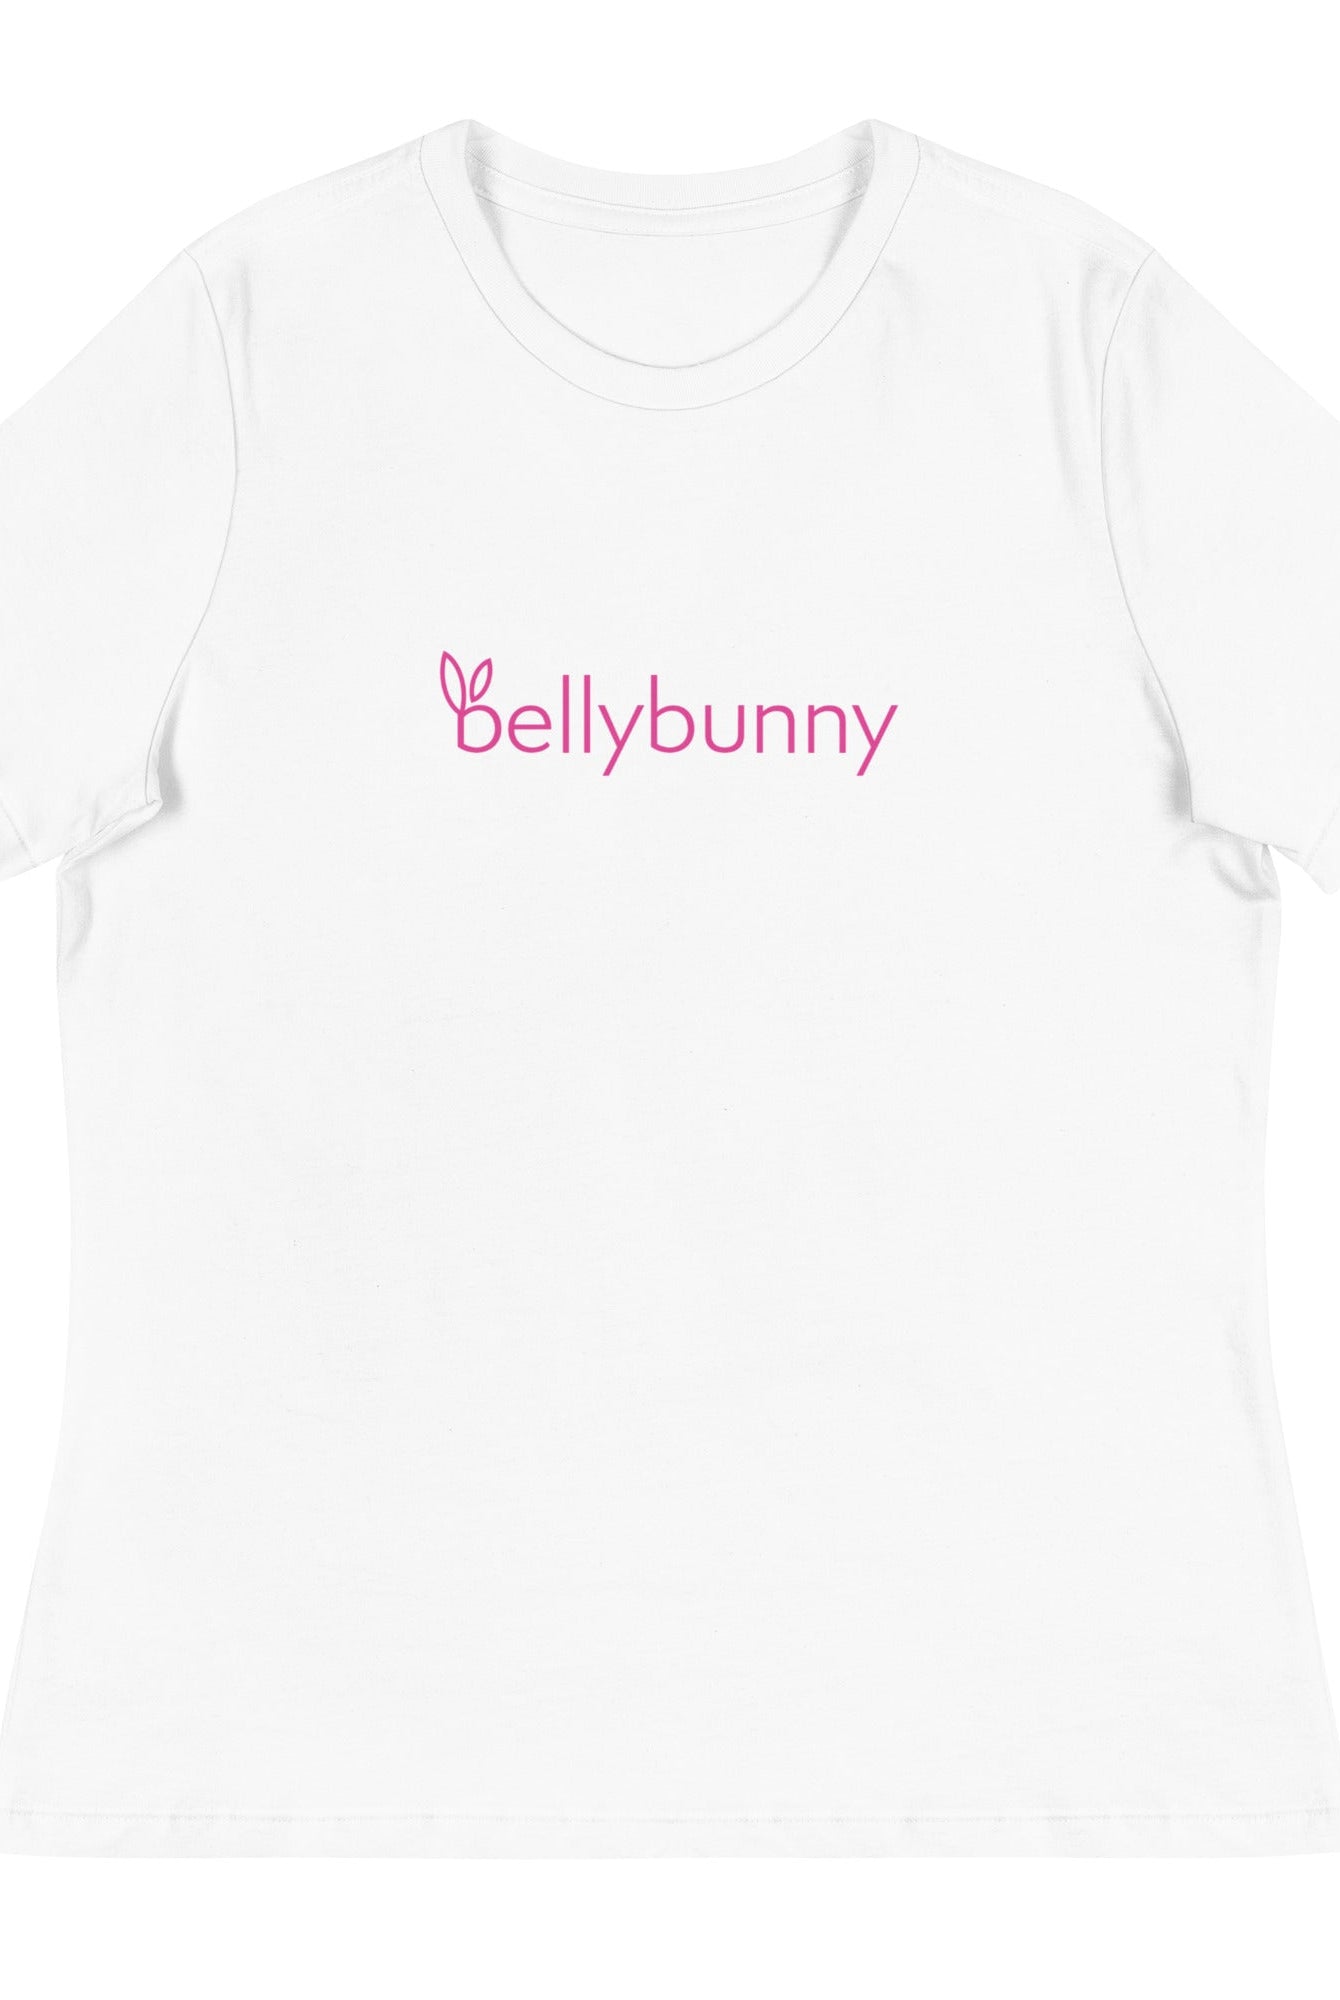 Women's Relaxed Fit T-Shirt-Bellybunny